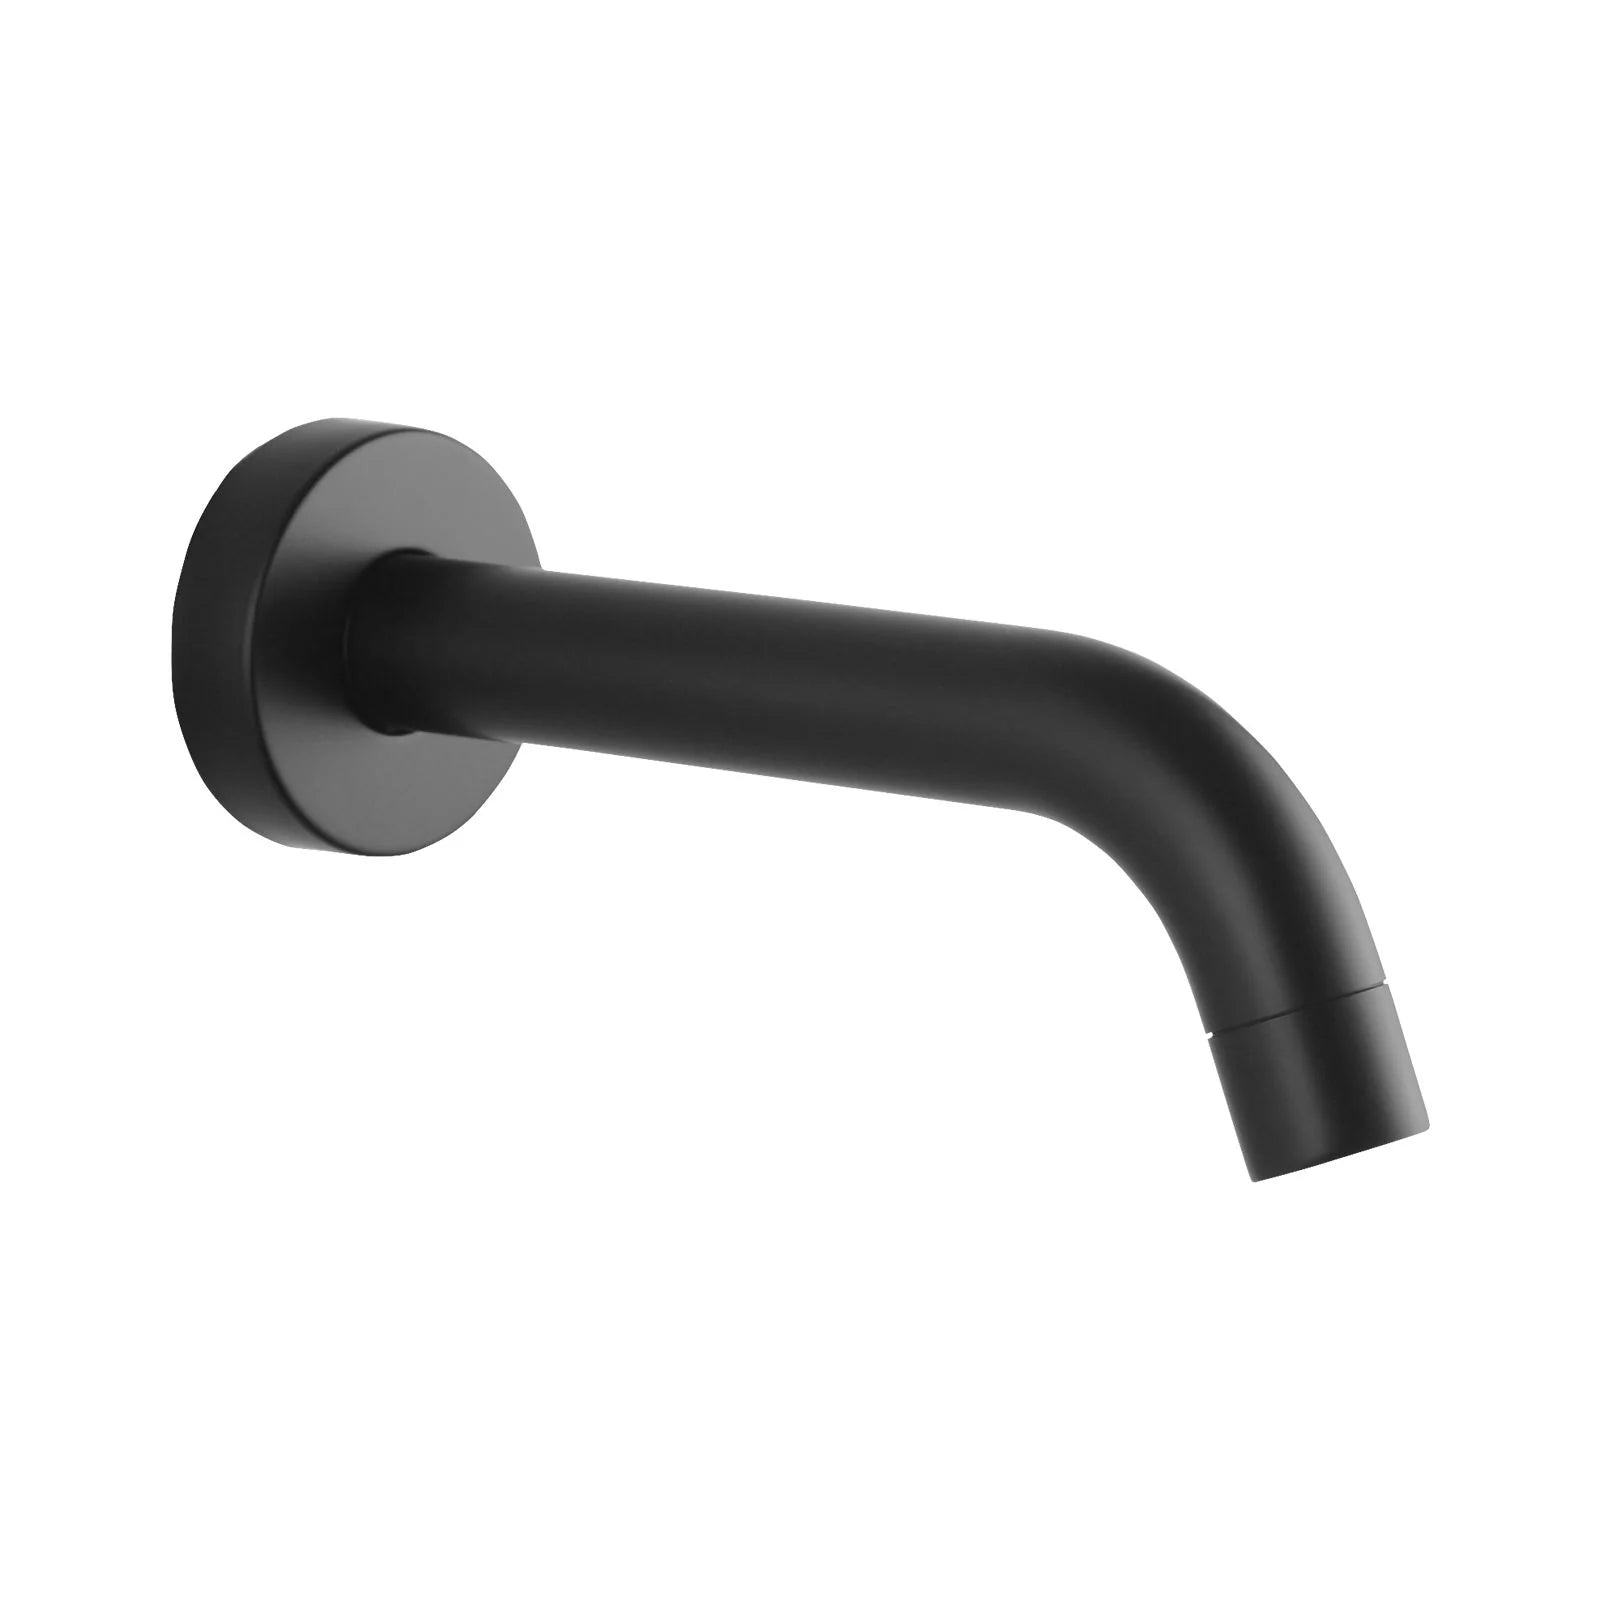 Lucid Pin Round Bathtub/Basin Wall Spout: a contemporary fixture adding elegance and functionality to your bathroom design-OX0012.BS